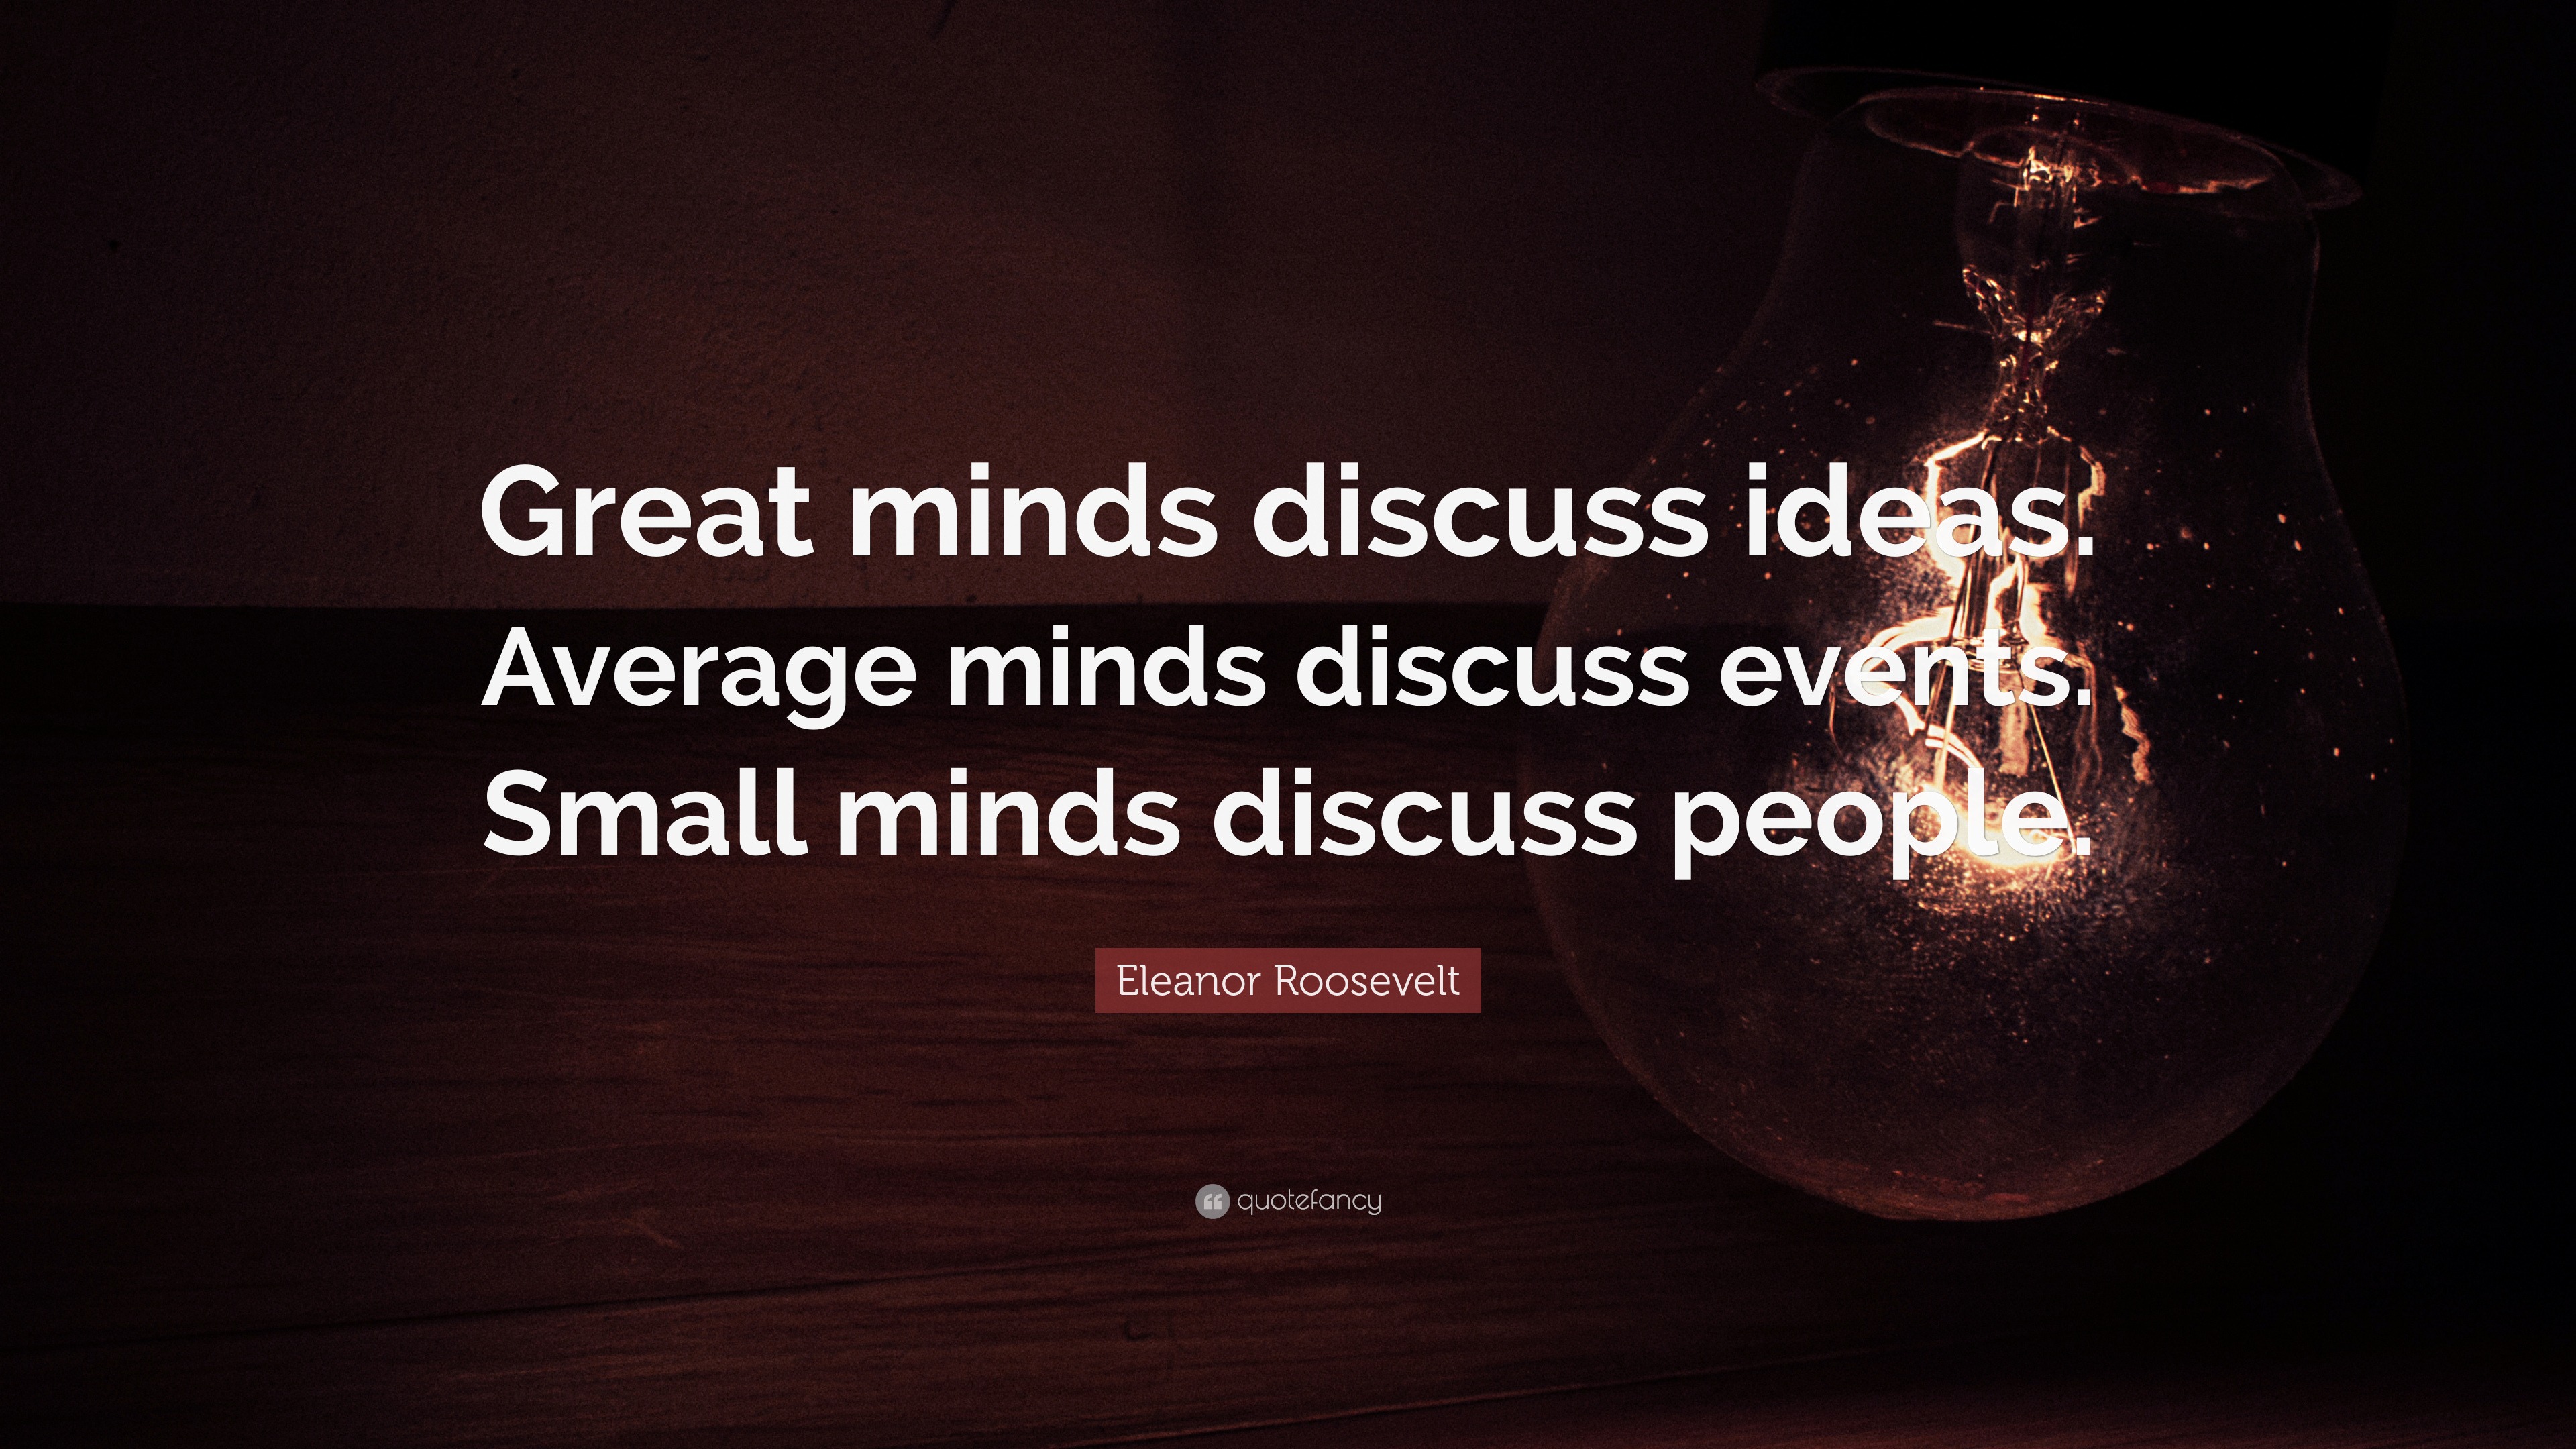 Eleanor Roosevelt Quote “Great minds discuss ideas